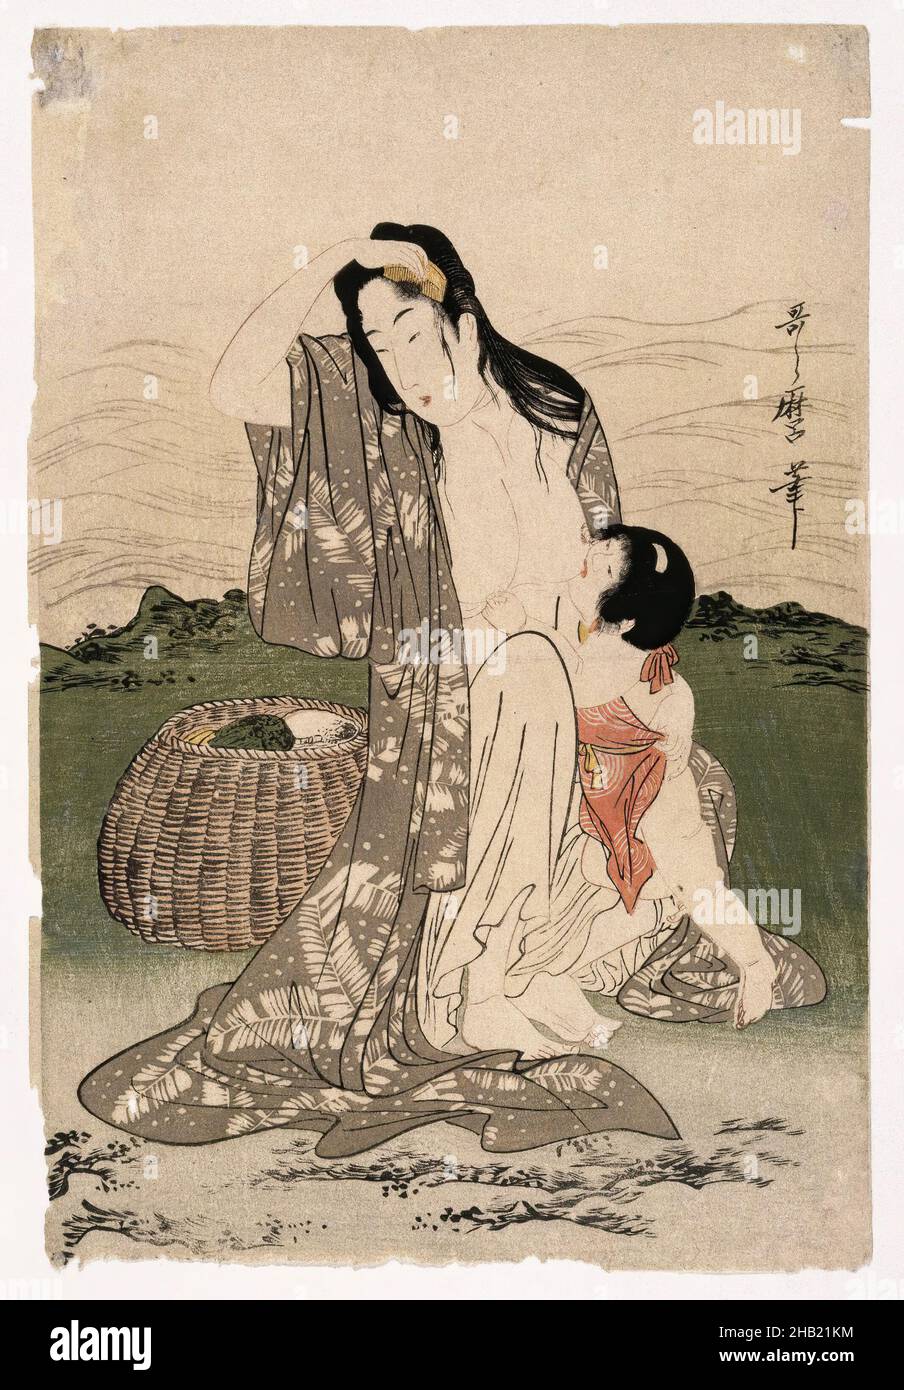 Abalone Divers, Kitagawa Utamaro, Japanese, 1753-1806, Color woodblock print on paper, Japan, ca. 1797-1798, Edo Period, 14 1/2 x 9 3/4 in., 36.8 x 24.8 cm, basket, breastfeeding, comb, intimate, mother and child, People Stock Photo